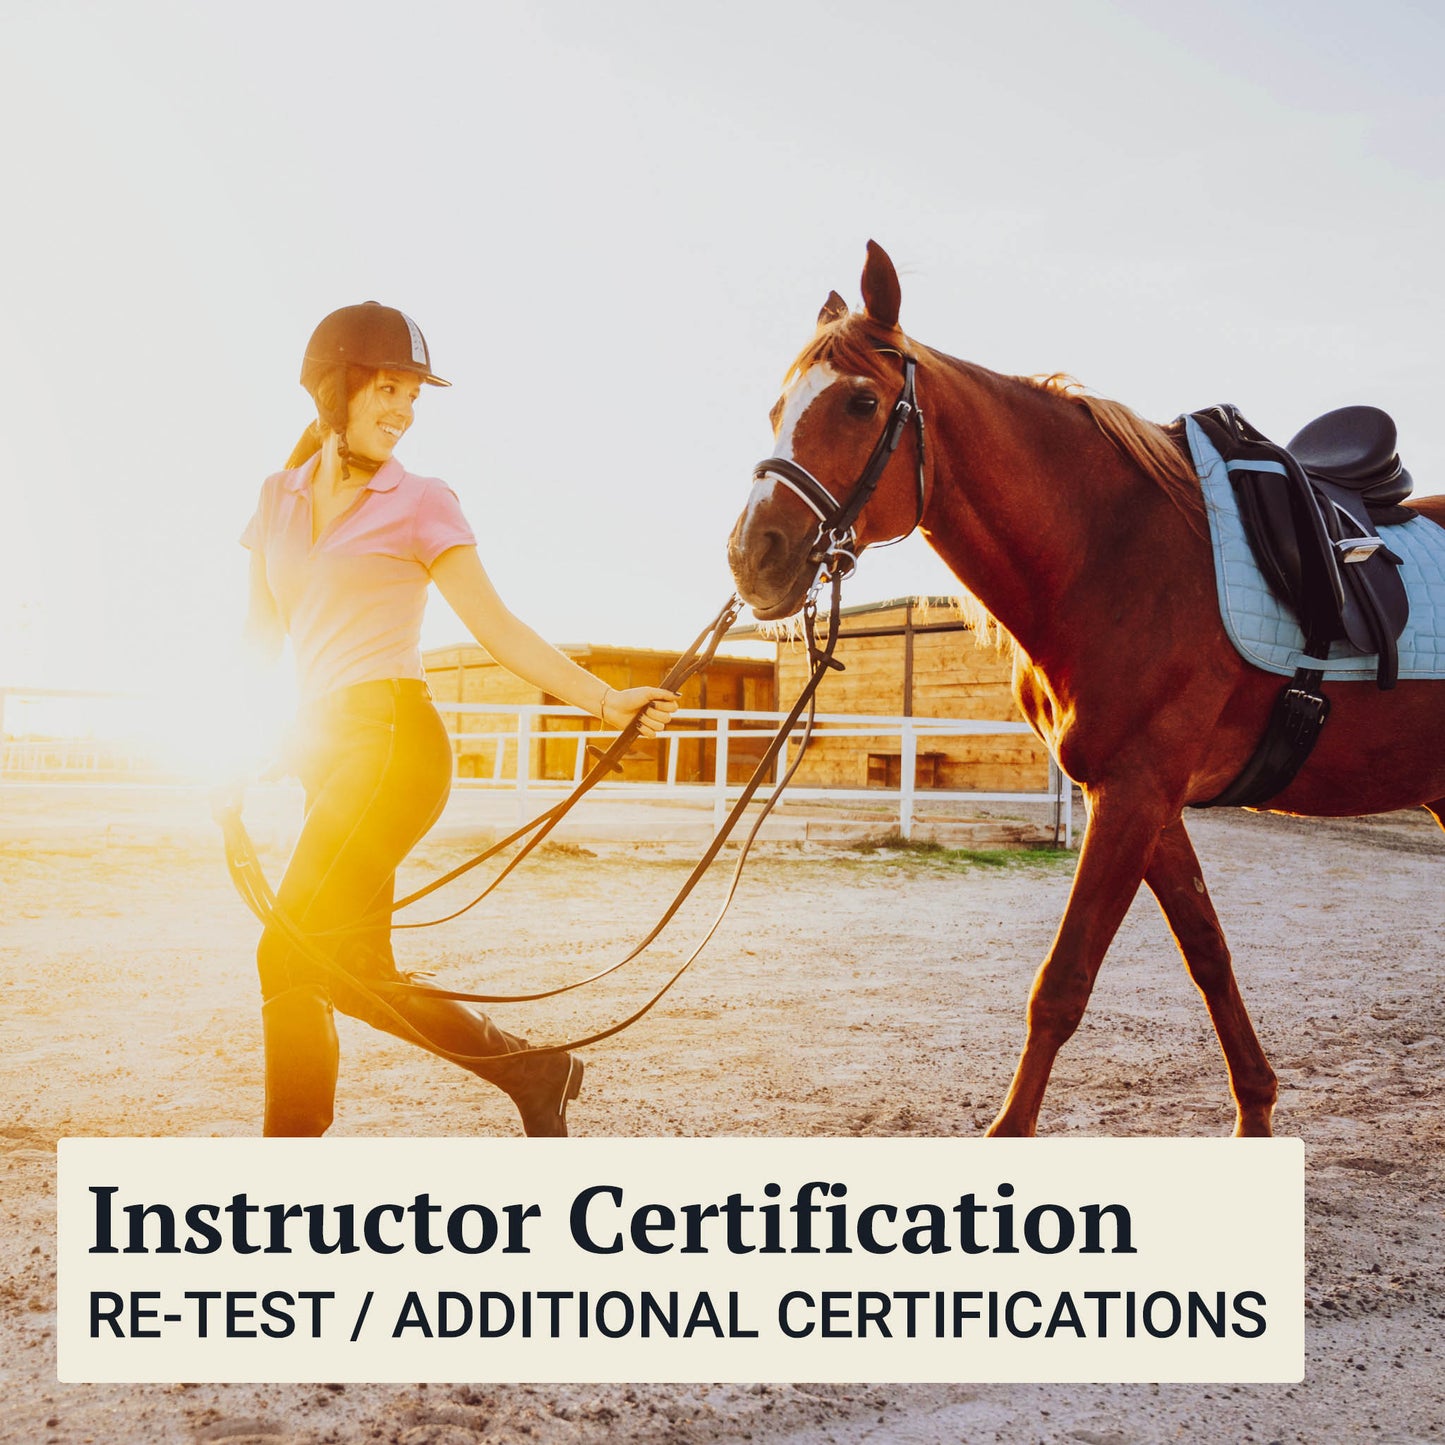 Instructor Certification: Re-Test / Additional Certifications